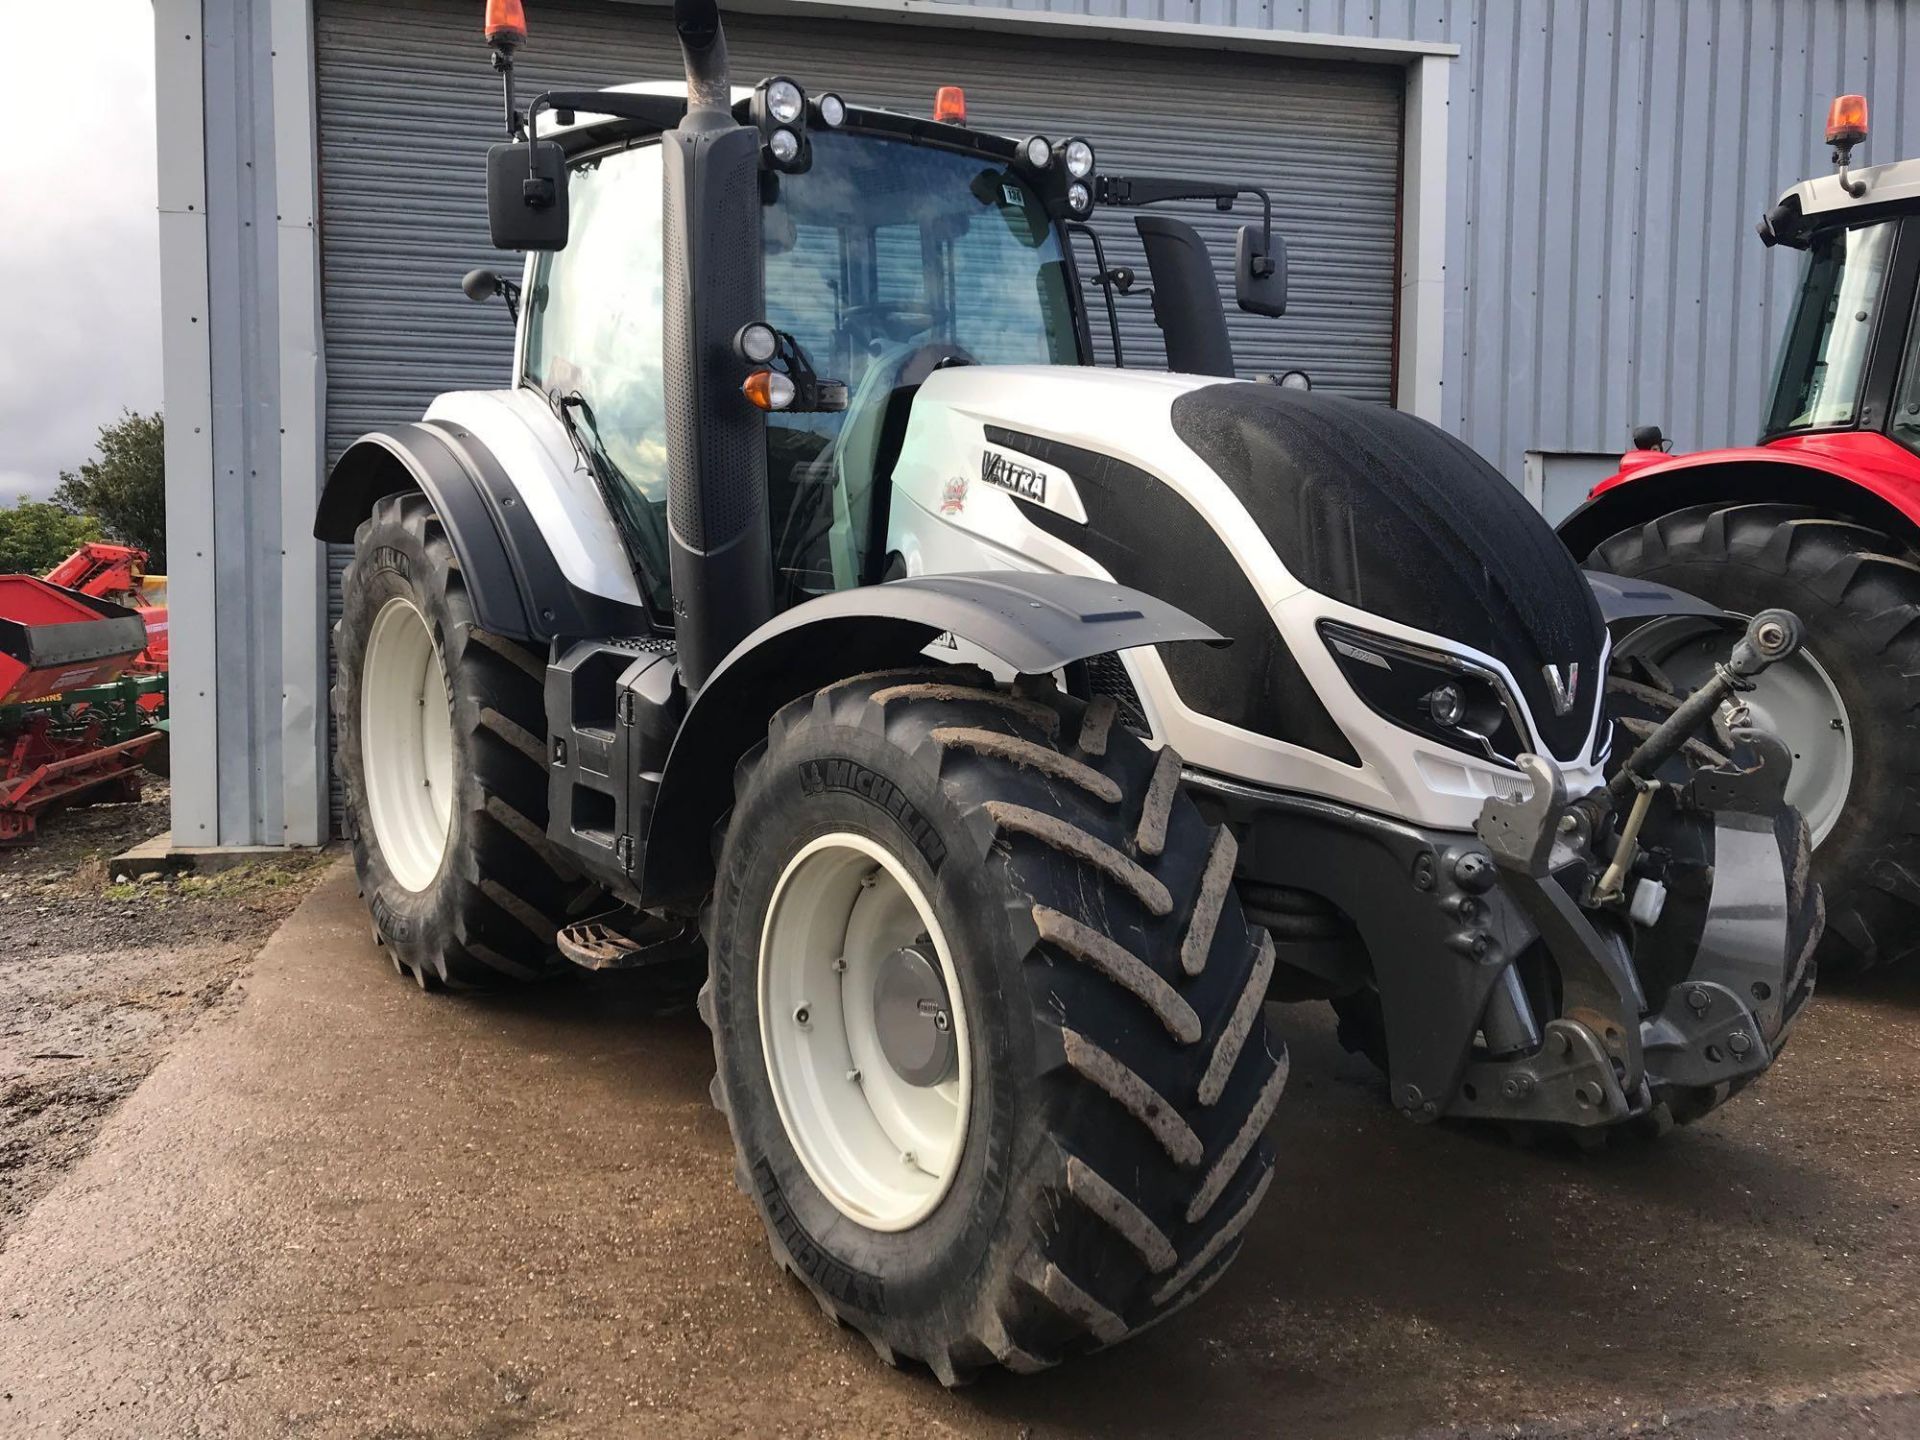 2015 Valtra T174 Versu 50kph tractor, powershift transmission, air suspension, 2 front and 4 rear sp - Image 4 of 15